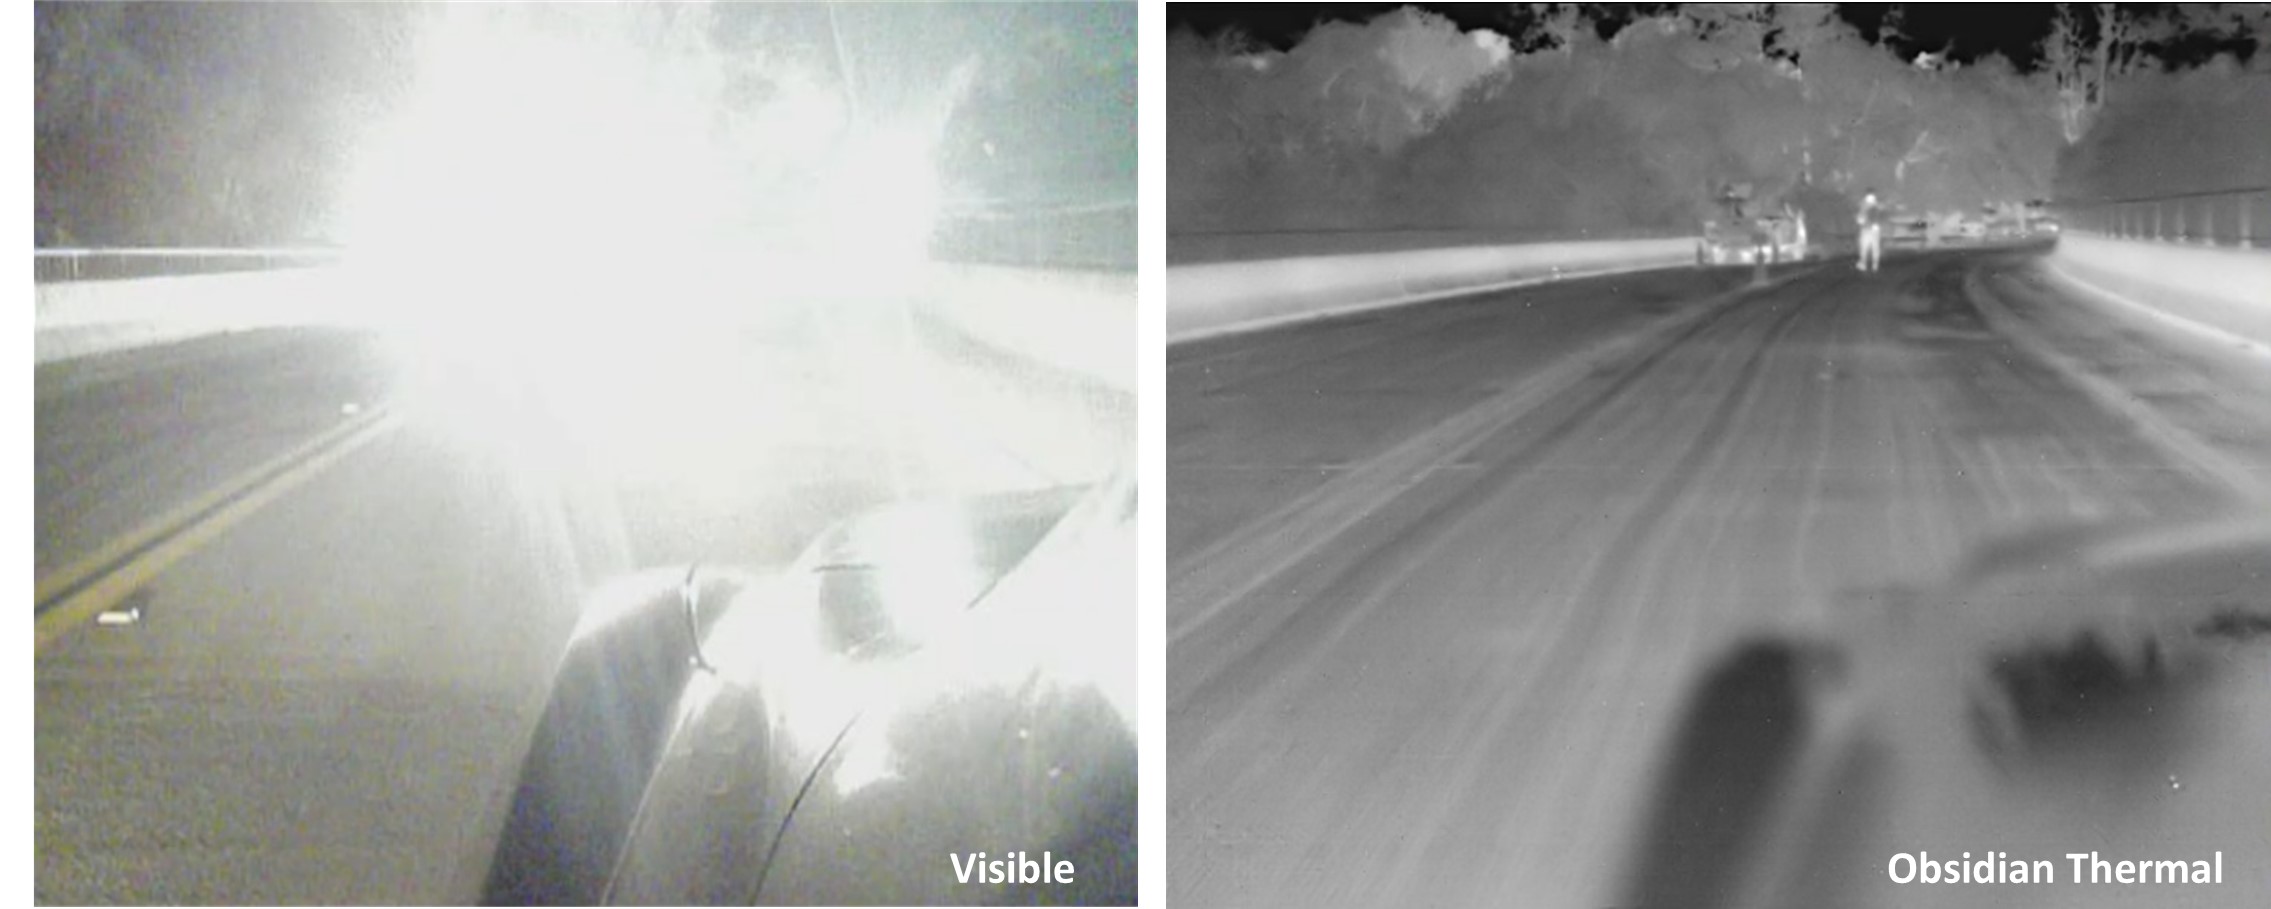 A dangerous nighttime driving situation can be averted with a thermal camera